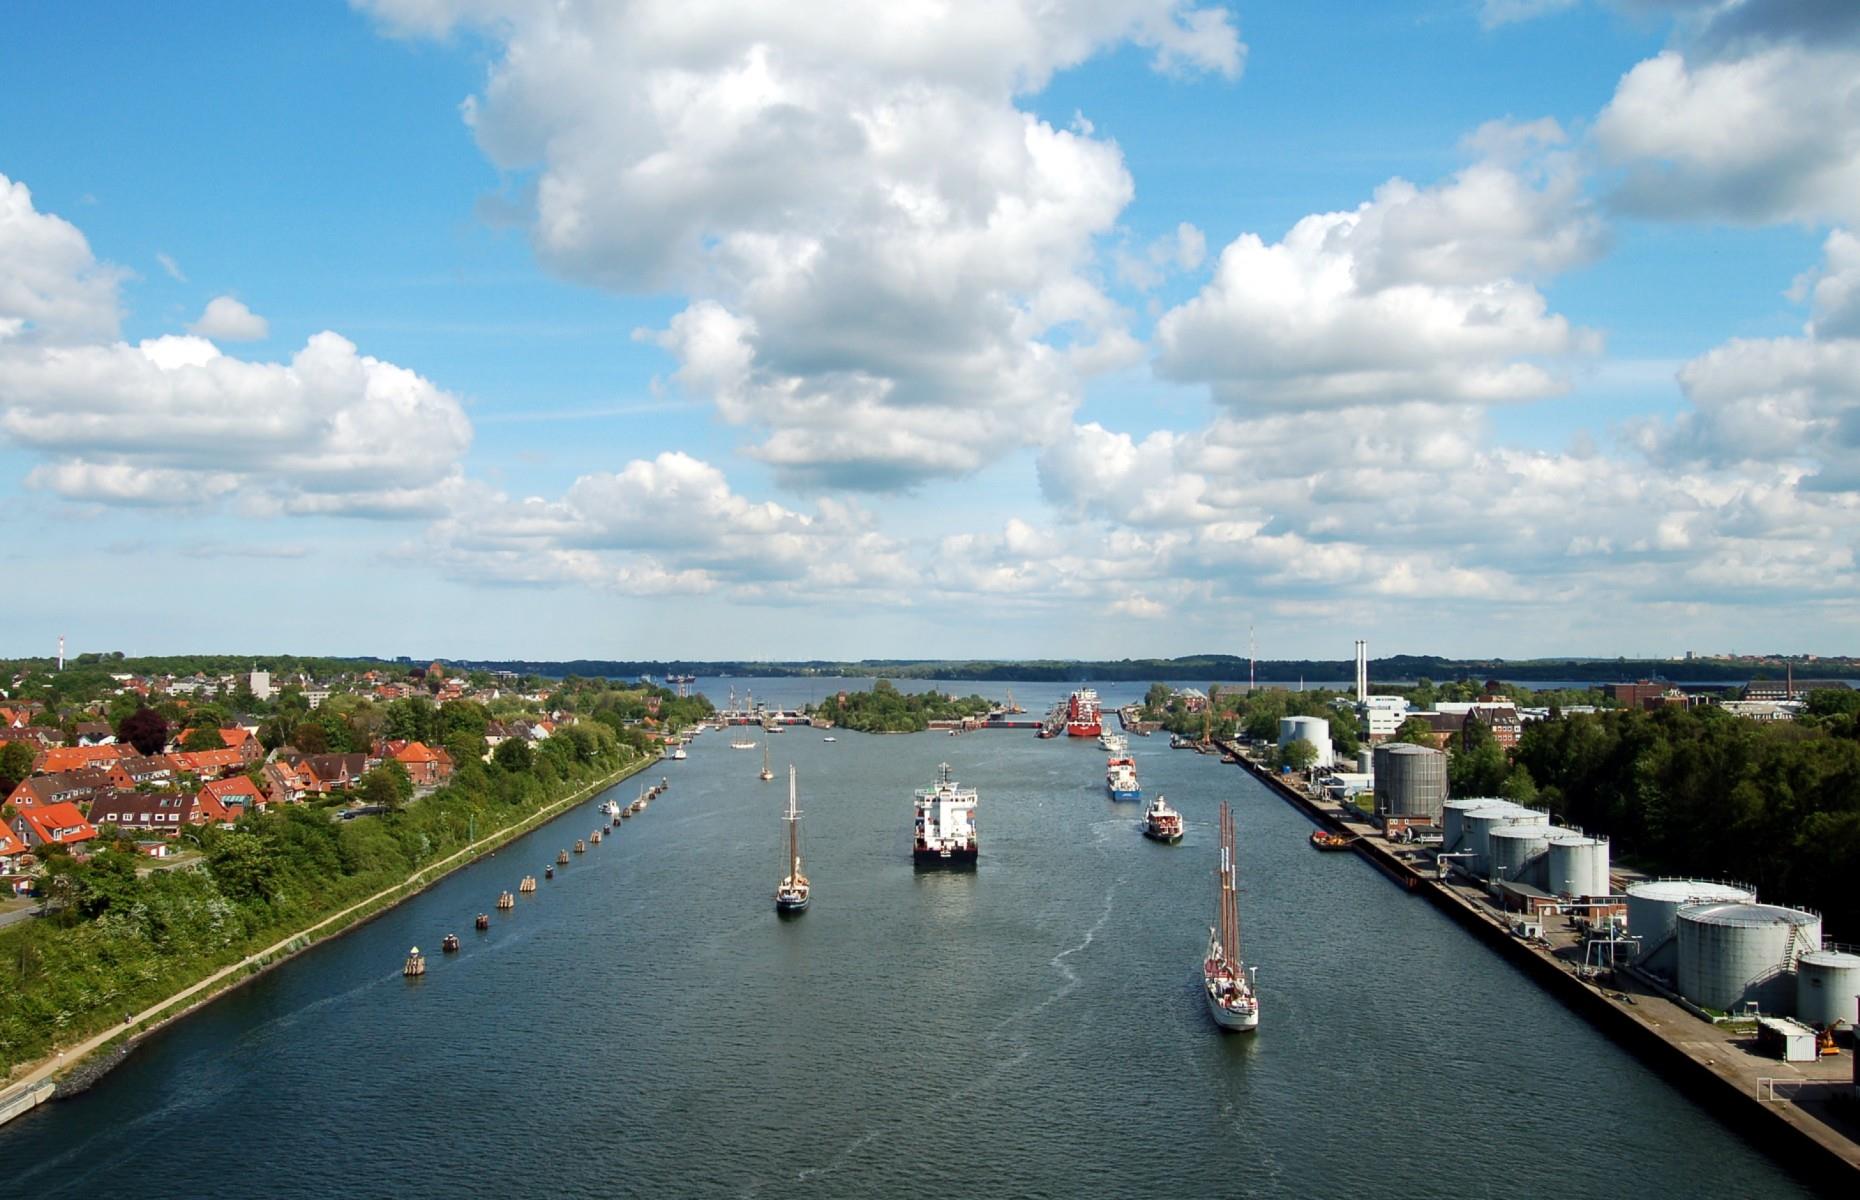 <p>Considered the busiest artificial waterway in the world, Germany’s mighty Kiel Canal trails between Brunsbuttelkoog on the North Sea to Holtenau on the Baltic Sea. Originally named the Kaiser-Wilhelm Canal, the waterway was built in the late 19th century and initially served the German military so ships would avoid having to travel northward around the Dutch peninsula. Extended in 1914 to meet the demand of naval traffic, the canal was later internationalized under the Treaty of Versailles after the First World War. Today, the Kiel Canal continues to be one of the world's most important waterways. </p>